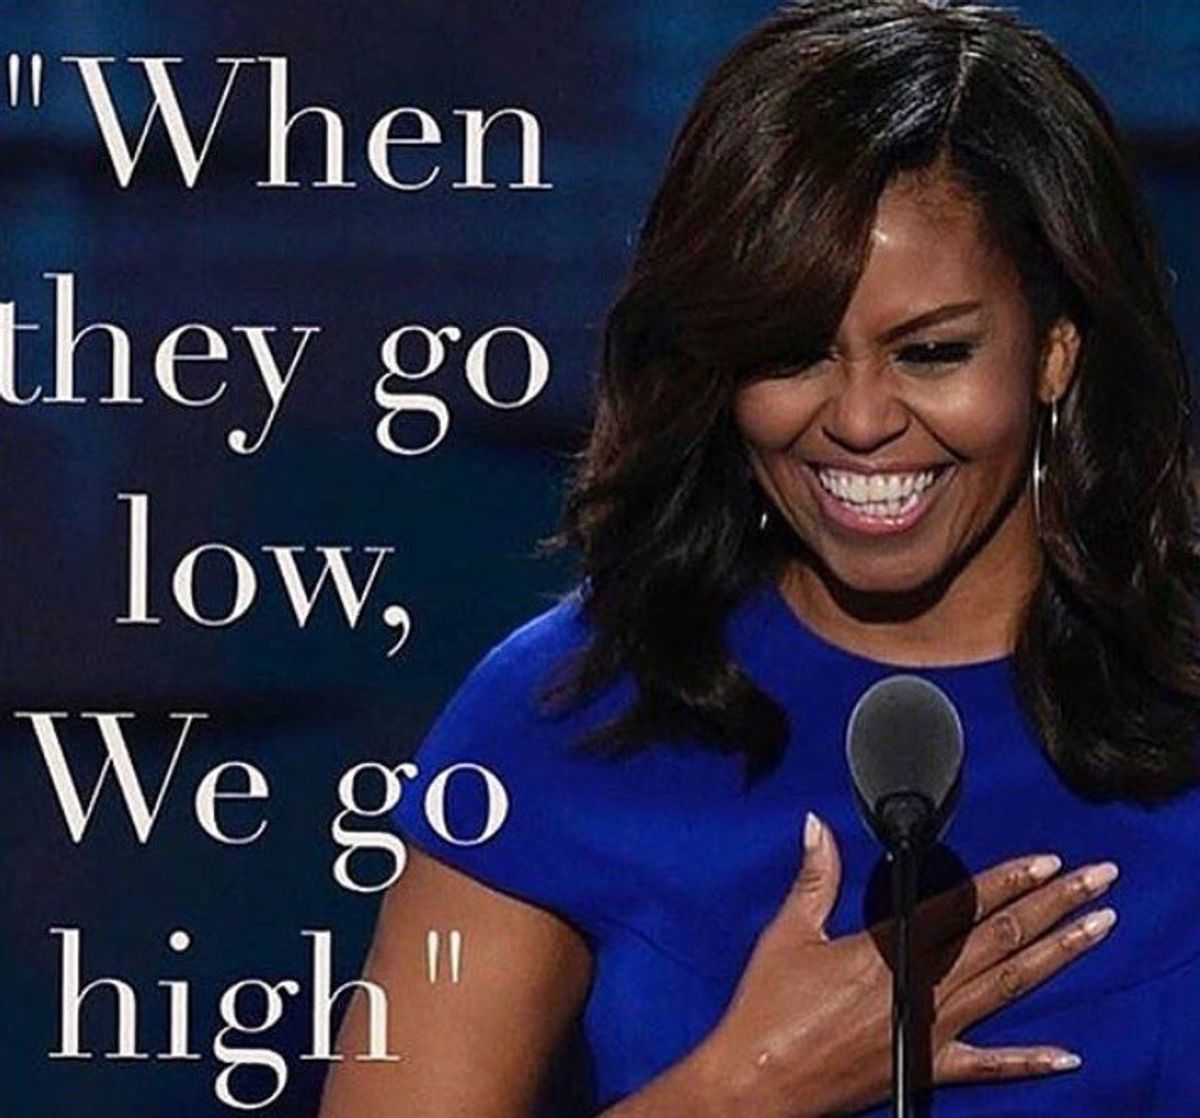 7 Lessons Learned From Michelle Obama's Speech